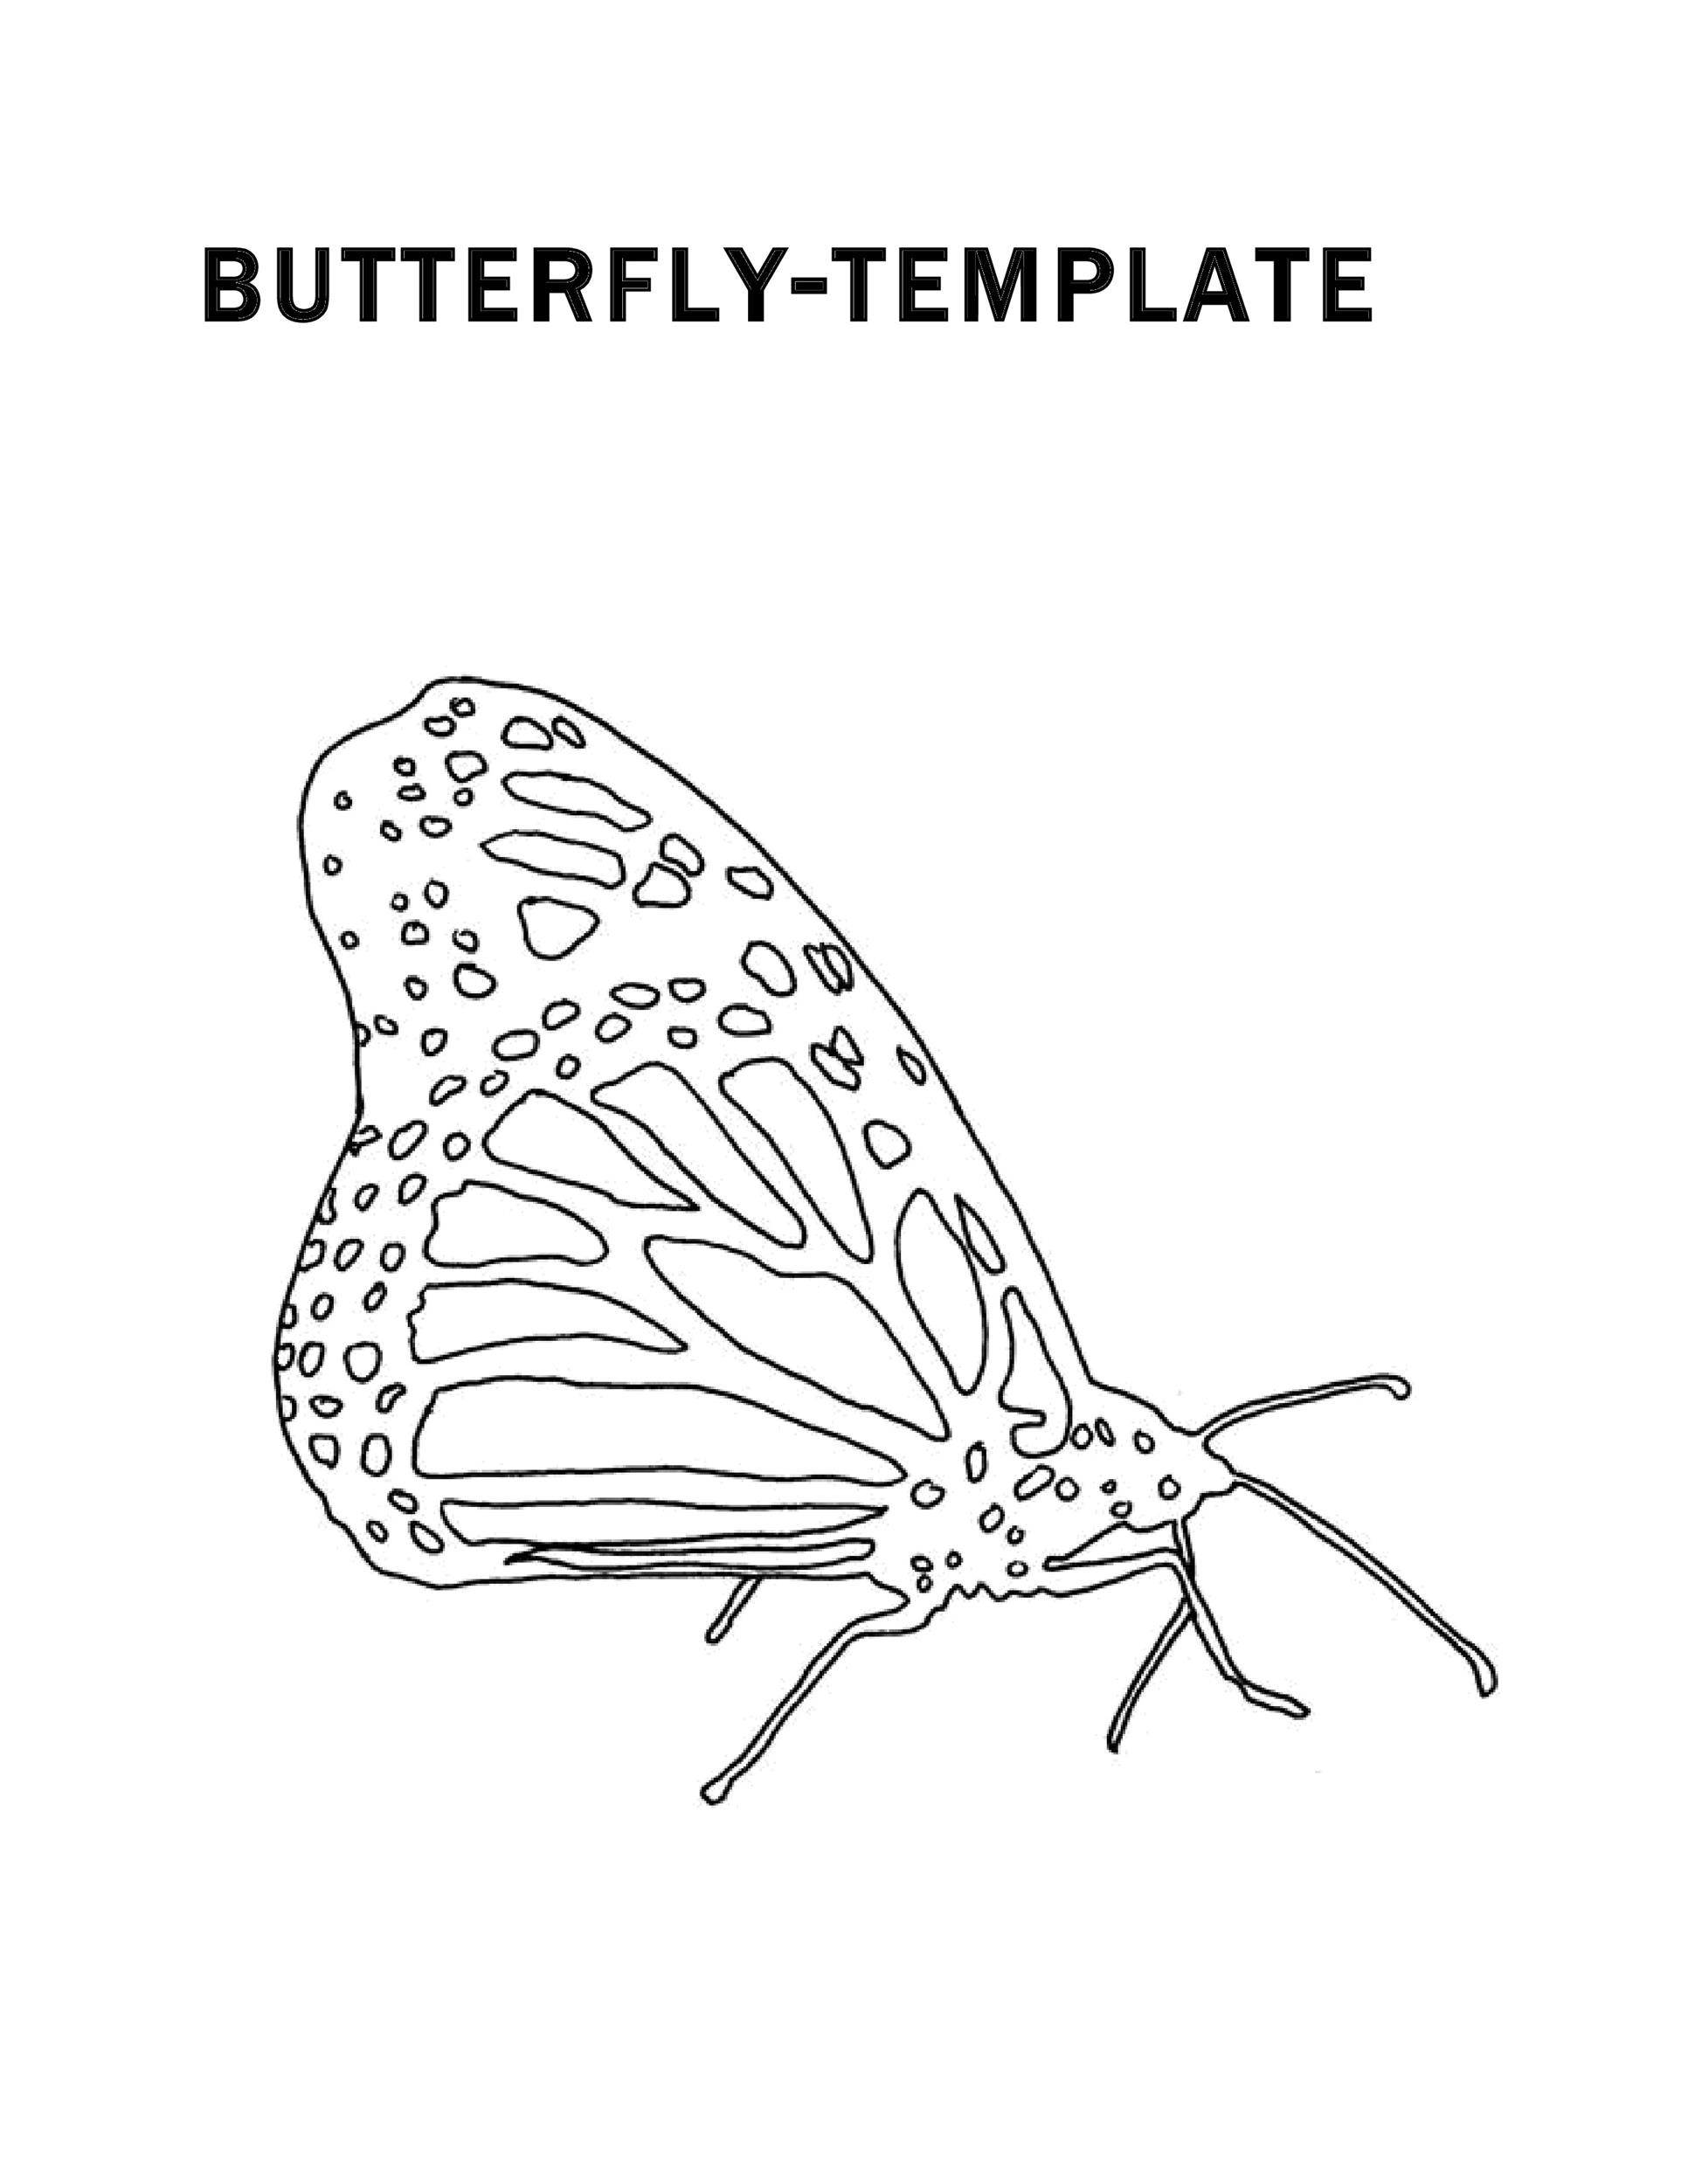 Free butterfly template 25